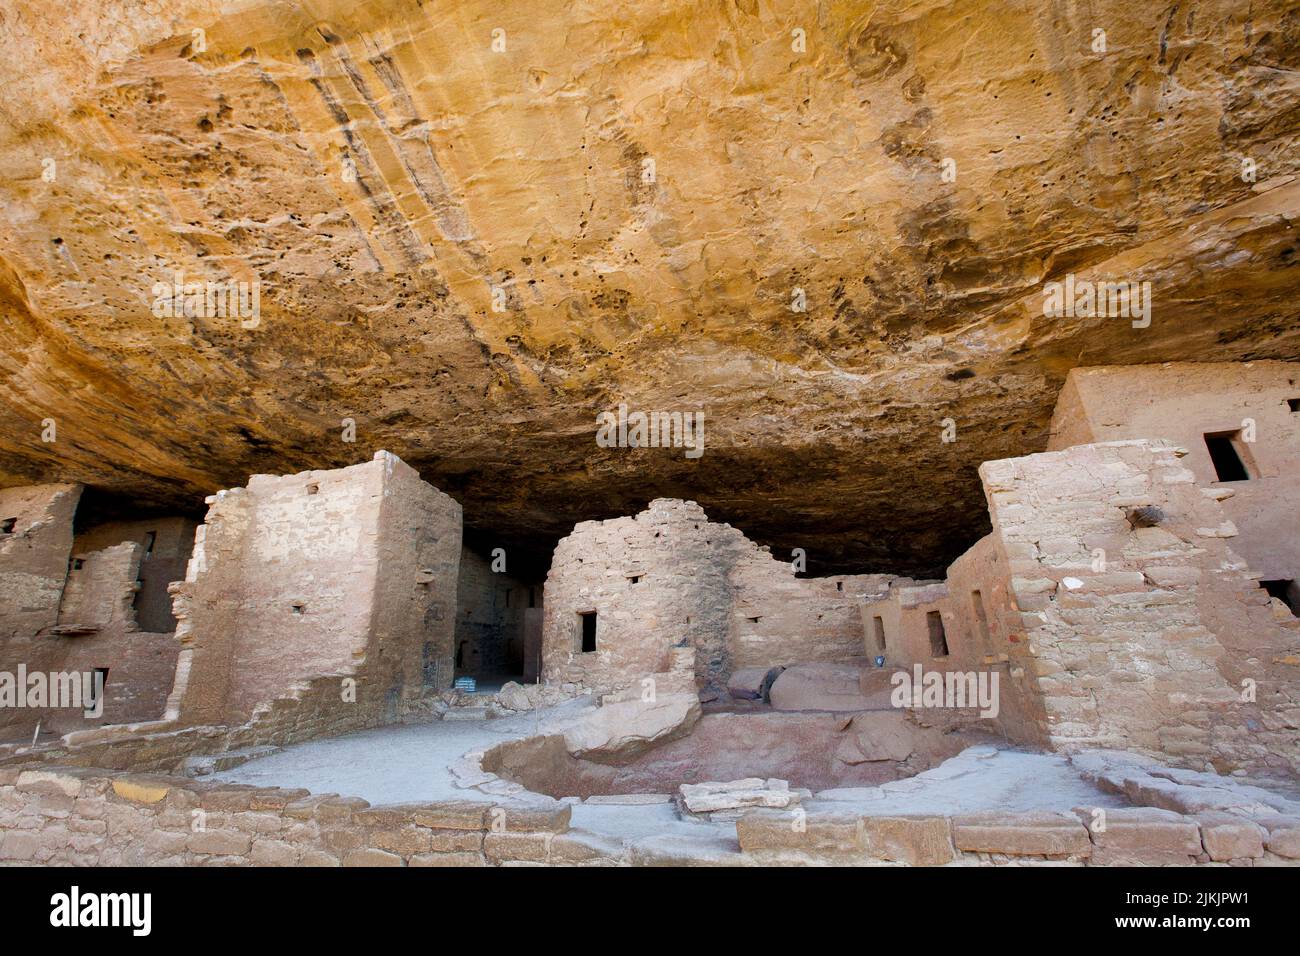 Spruce Tree House ruins located in Mesa Verde National Park on the Colorado Plateau, CO. Stock Photo